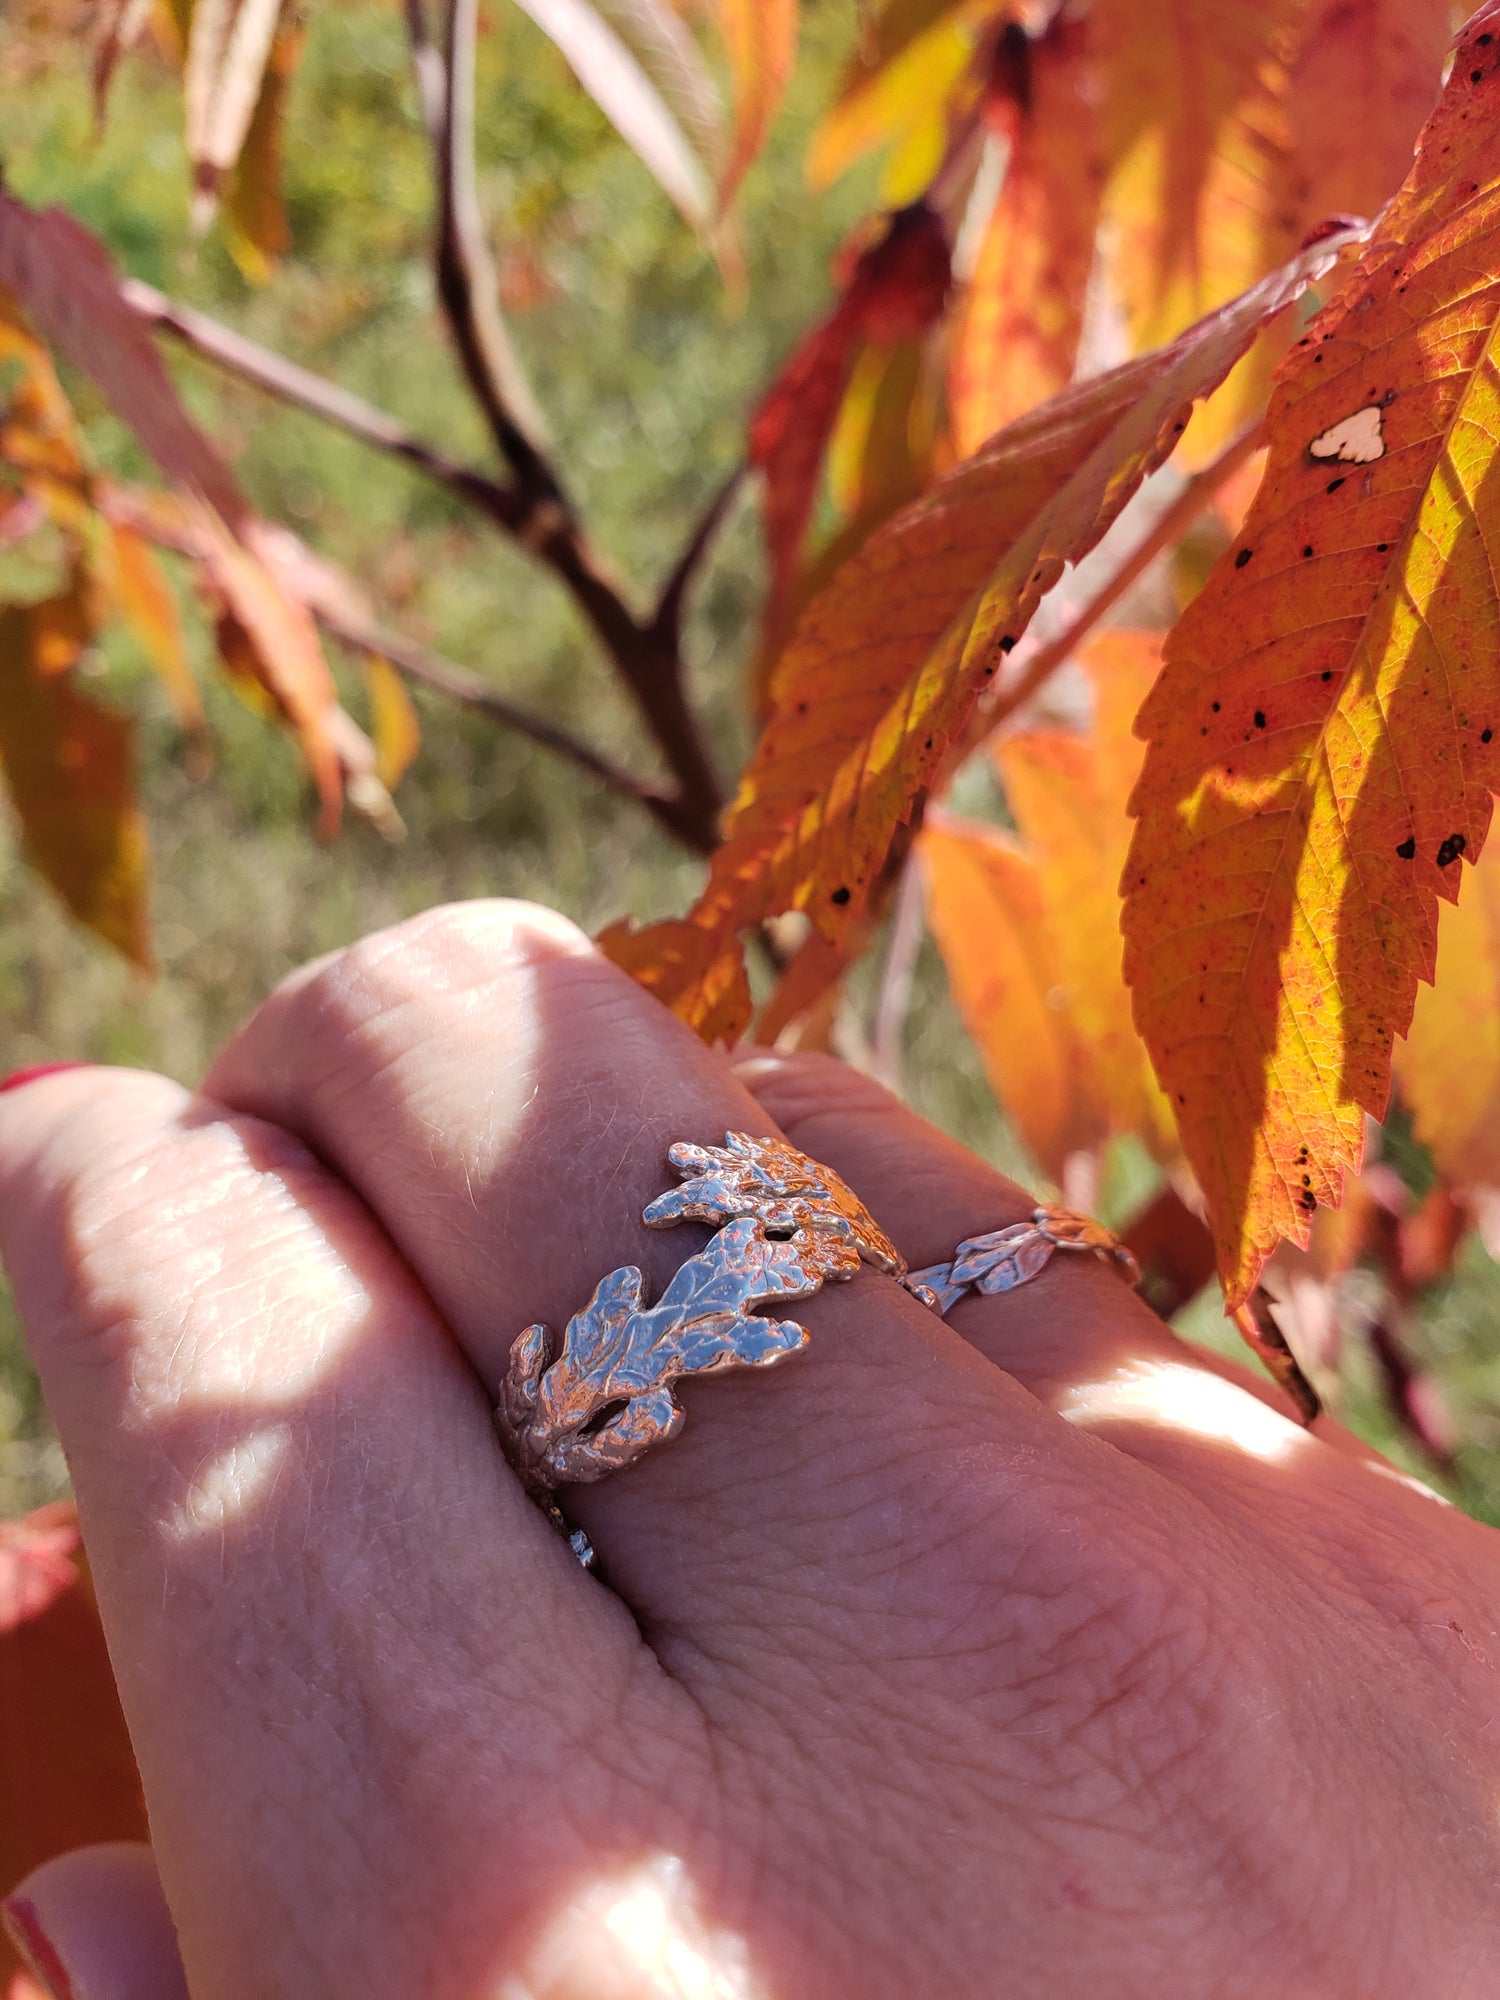 A hand wearing two silver rings made from cedar. Orange sumac leaves are in the background.